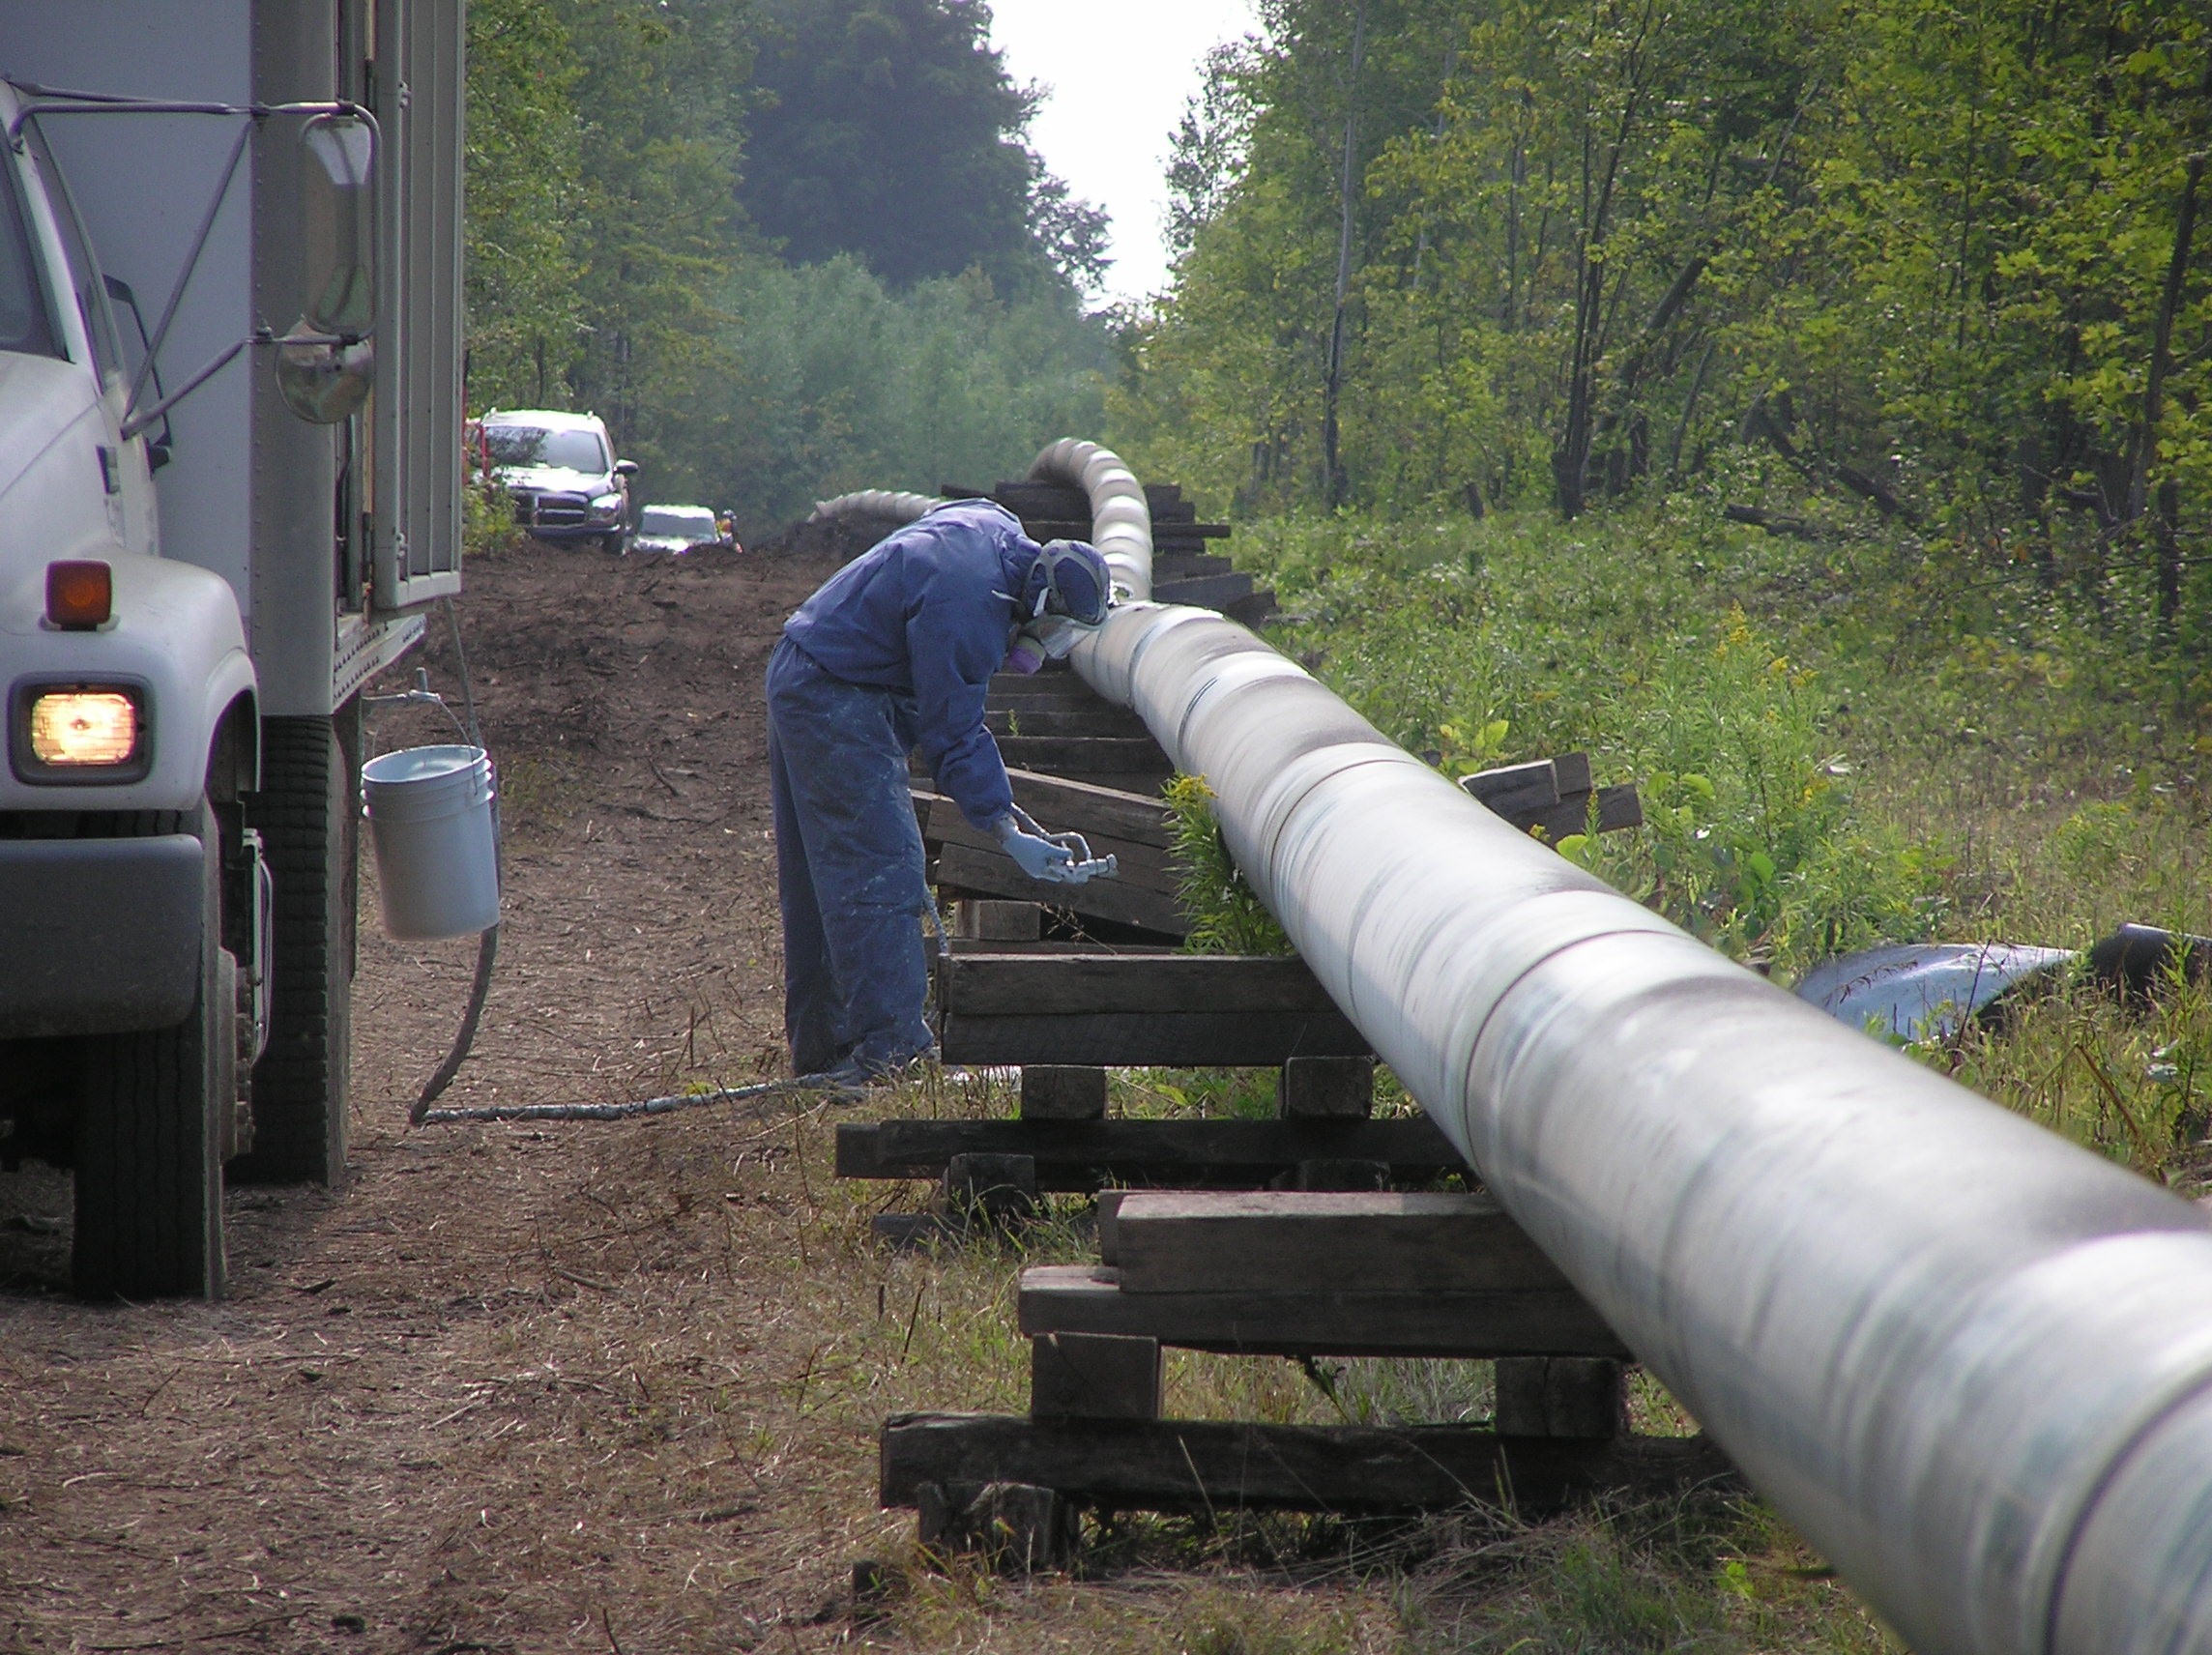 Worker wearing gas mask and inspecting pipeline next to truck.